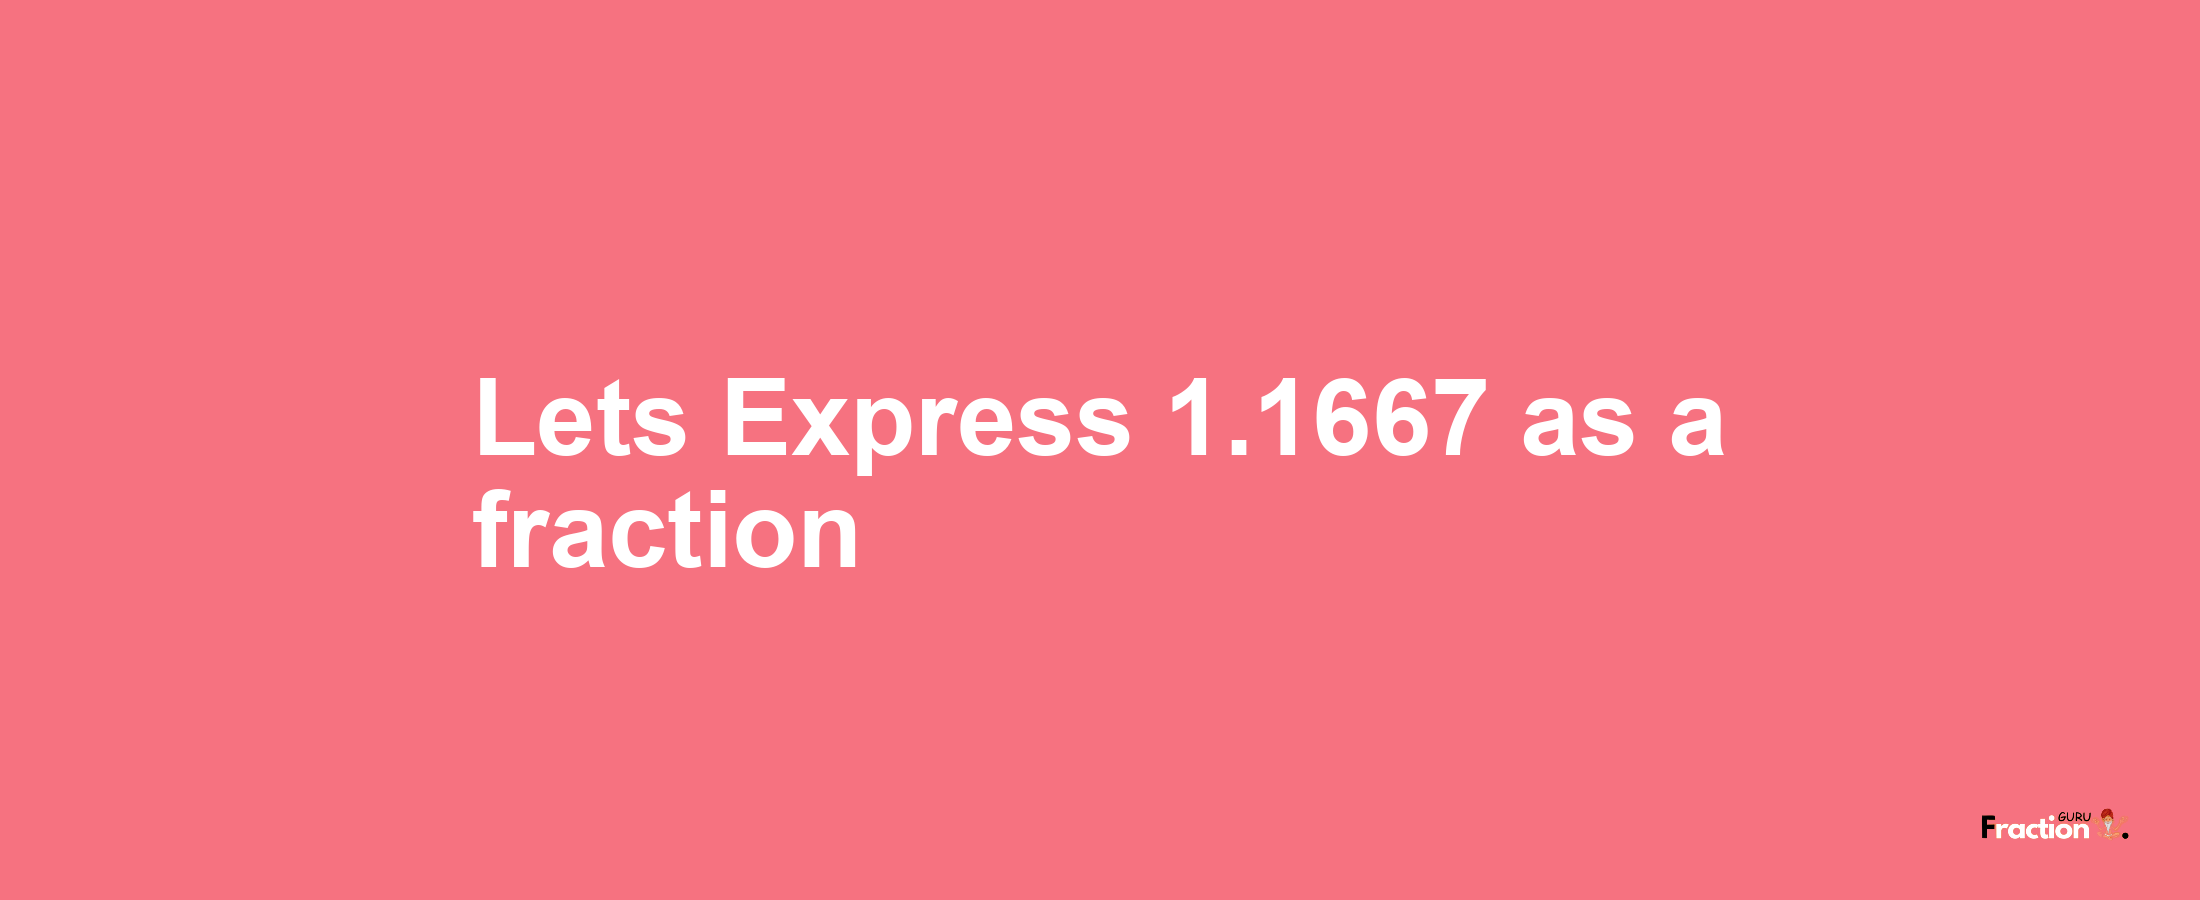 Lets Express 1.1667 as afraction